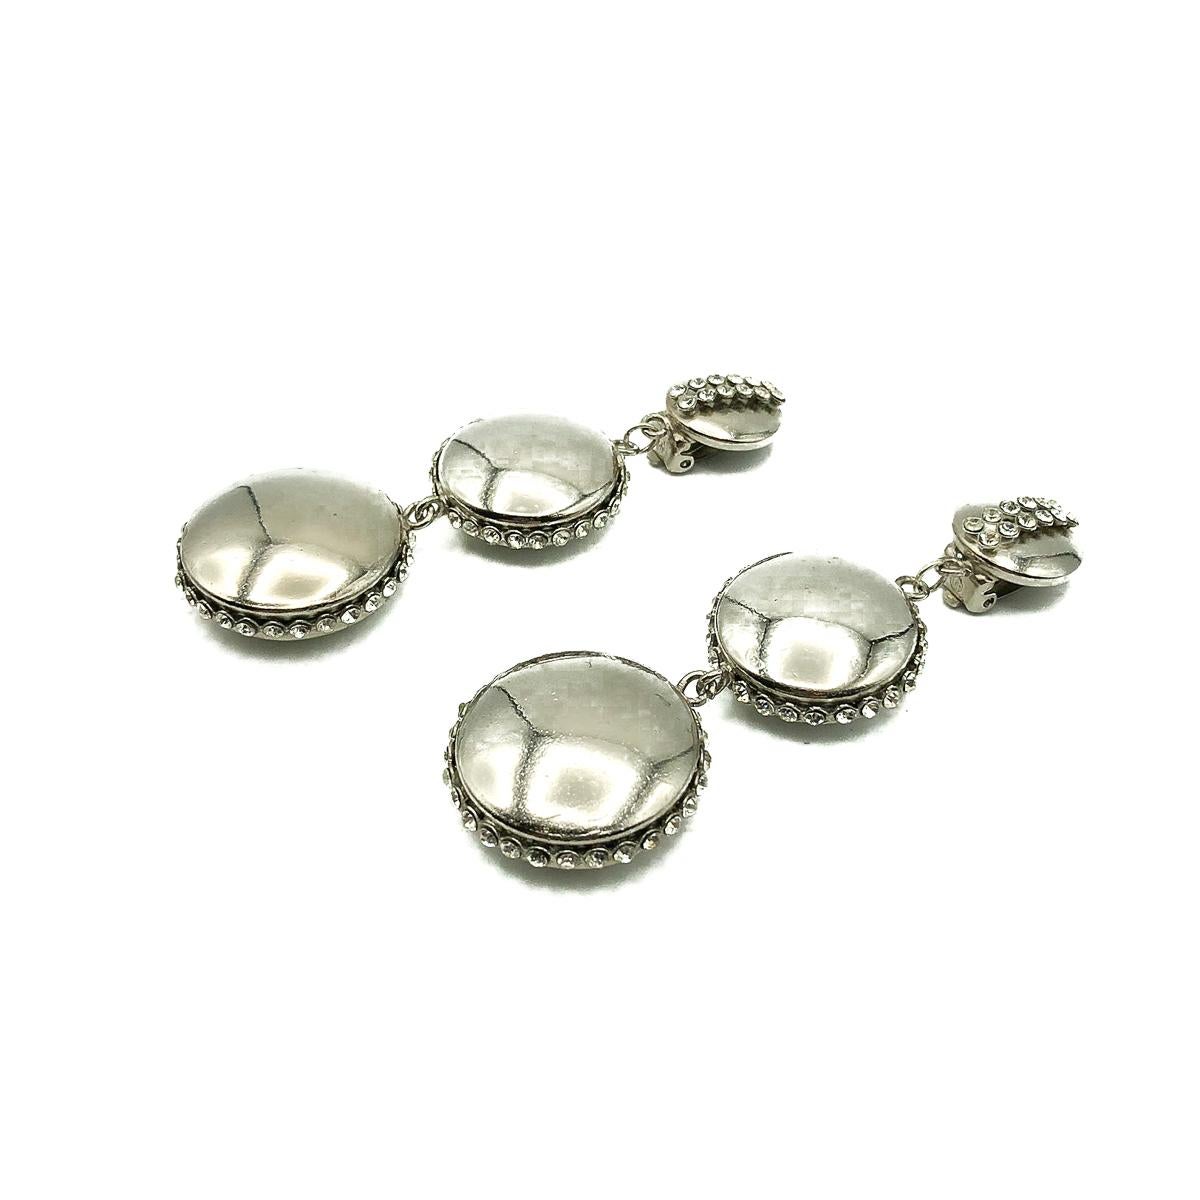 Vintage Monochrome Button Earrings. Crafted in high quality chromed metal and glass crystals. In very good vintage condition without damage or repair, approx. 8cms. A fabulous pair of ultra chic statement earrings that will prove versatile and